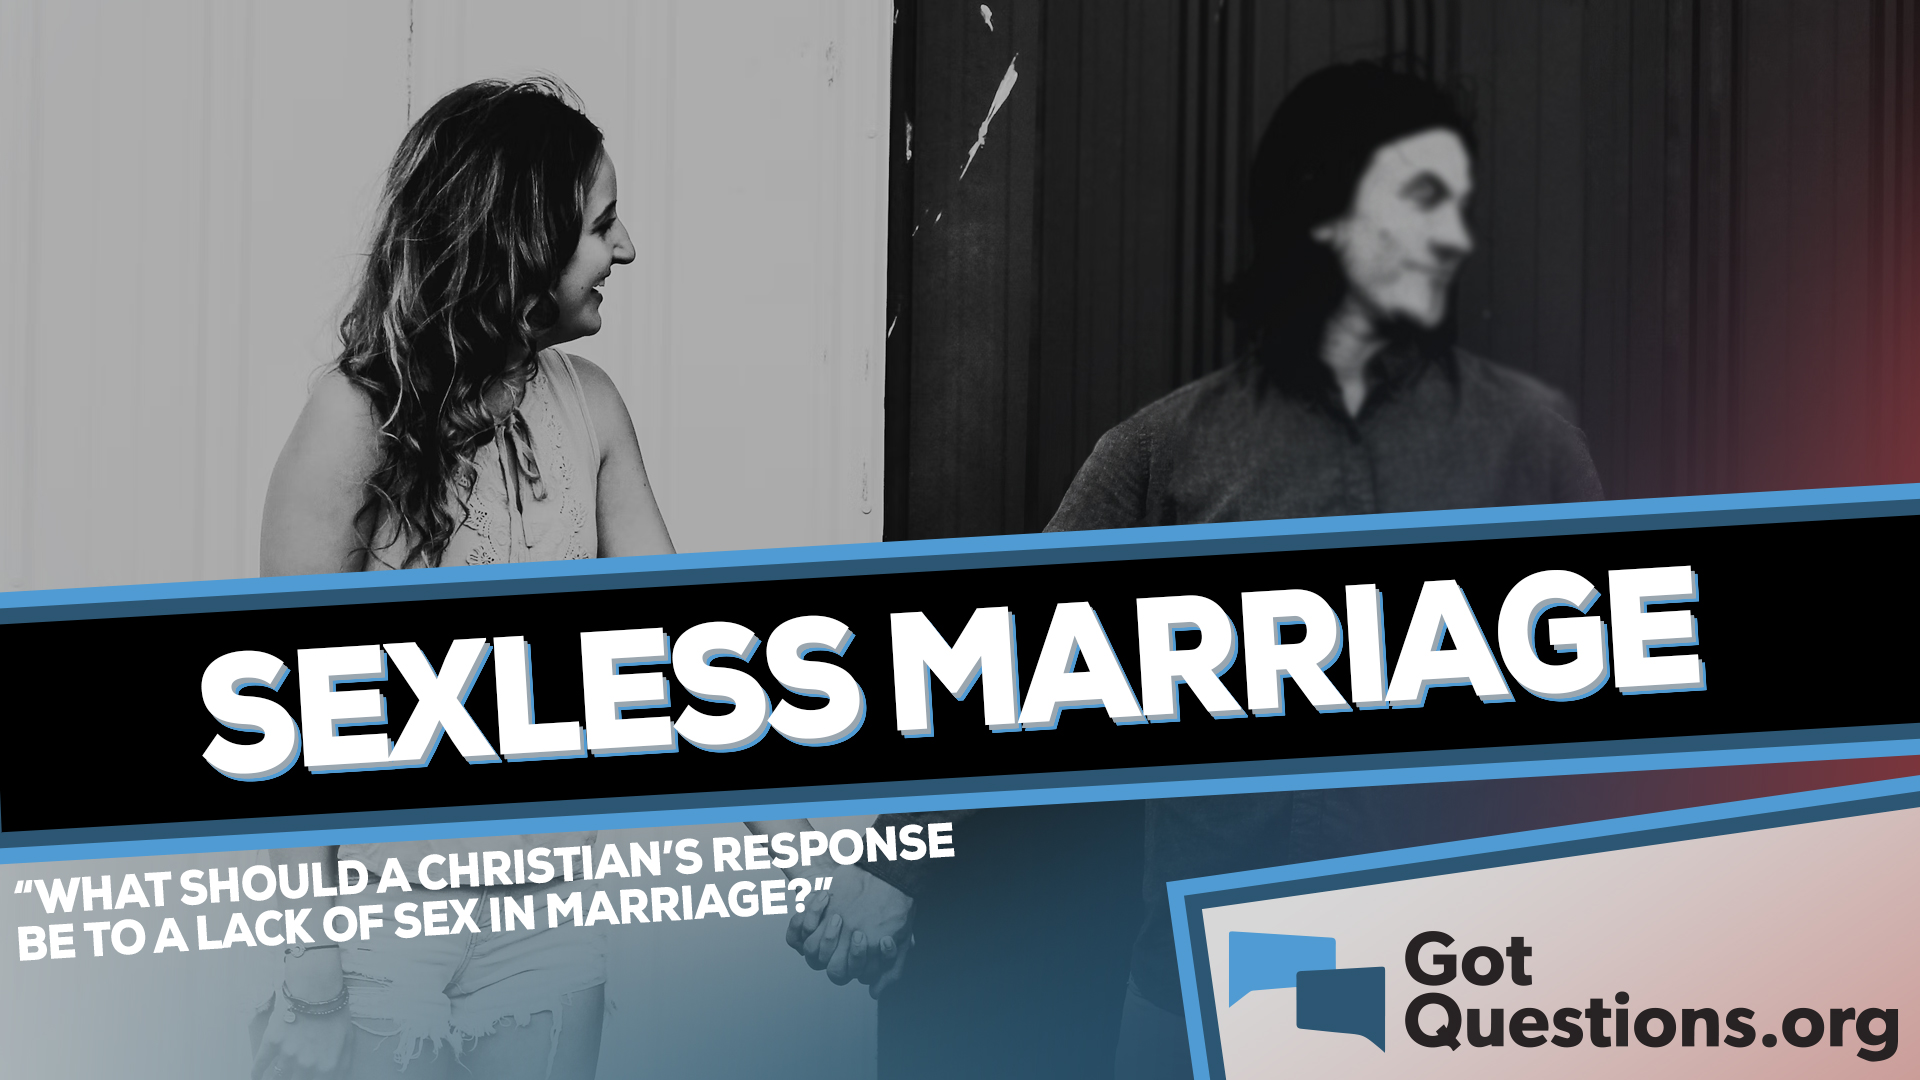 What should be a Christians response to a lack of sex in marriage (a sexless marriage)? GotQuestions image